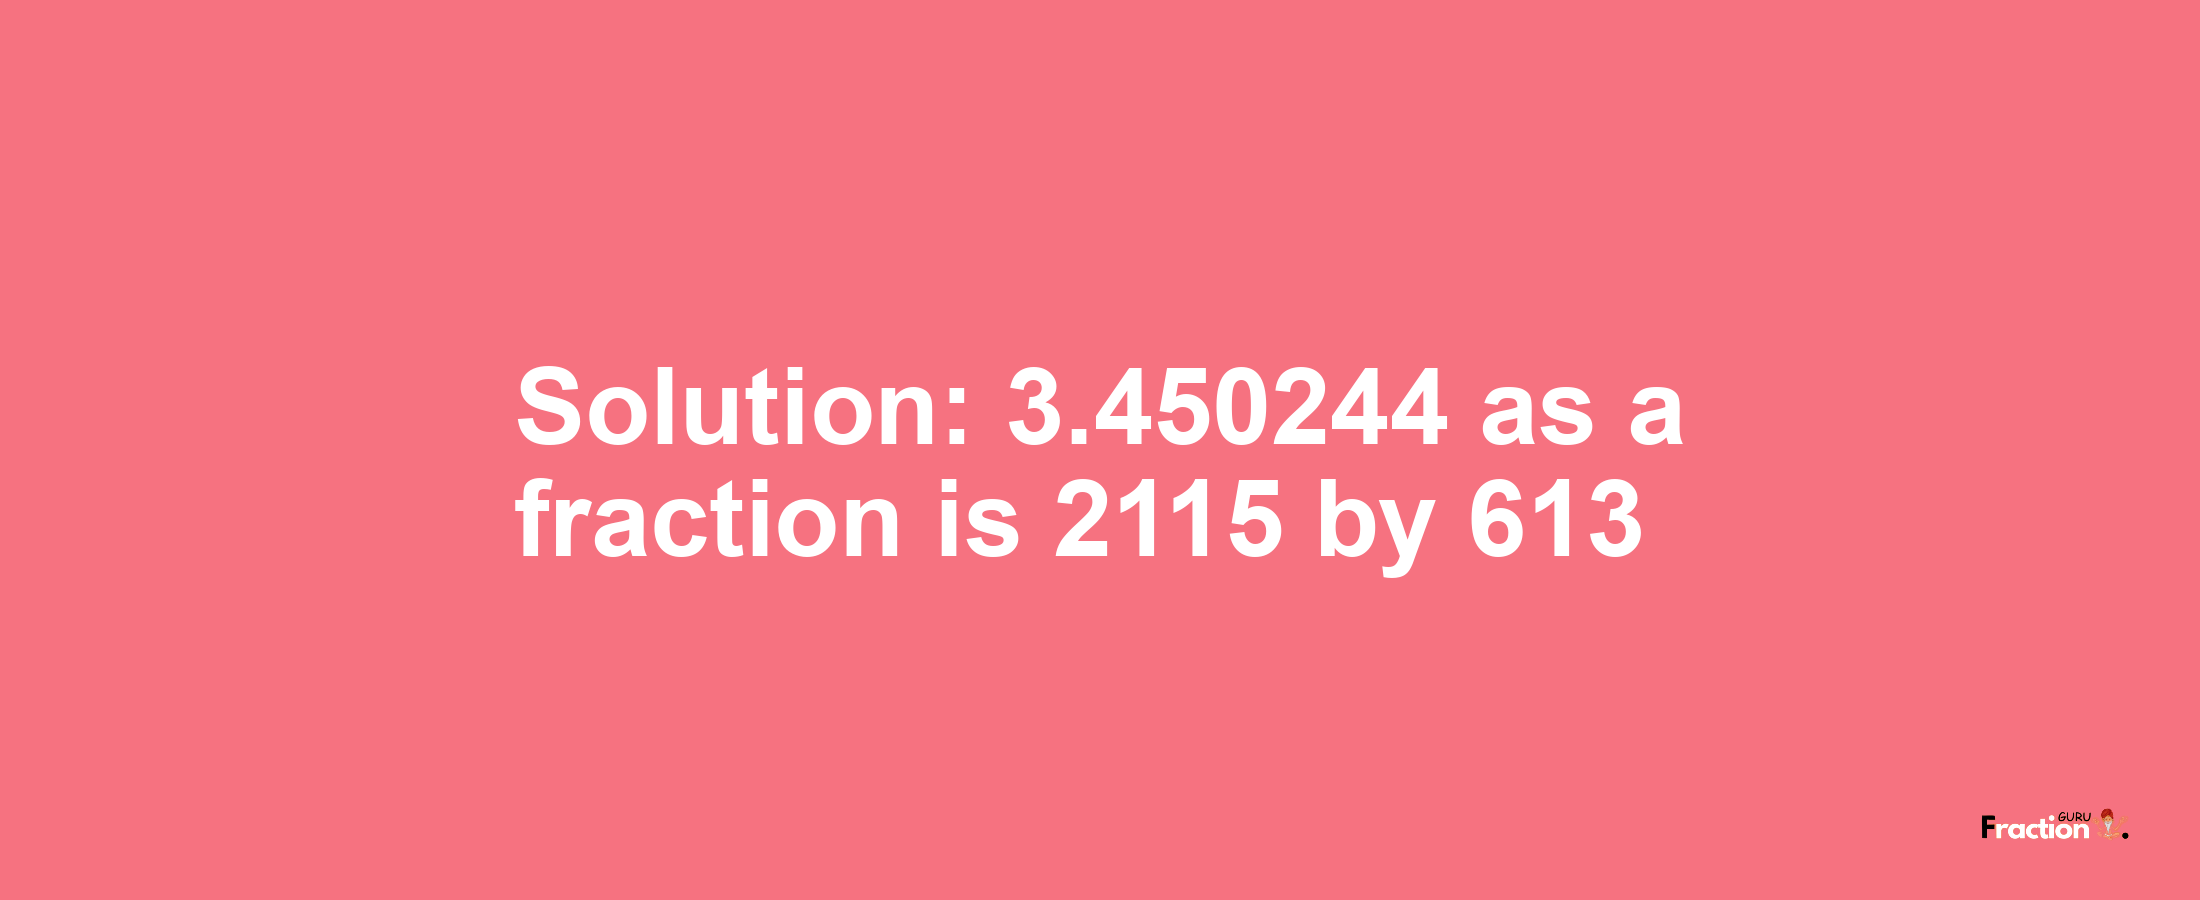 Solution:3.450244 as a fraction is 2115/613